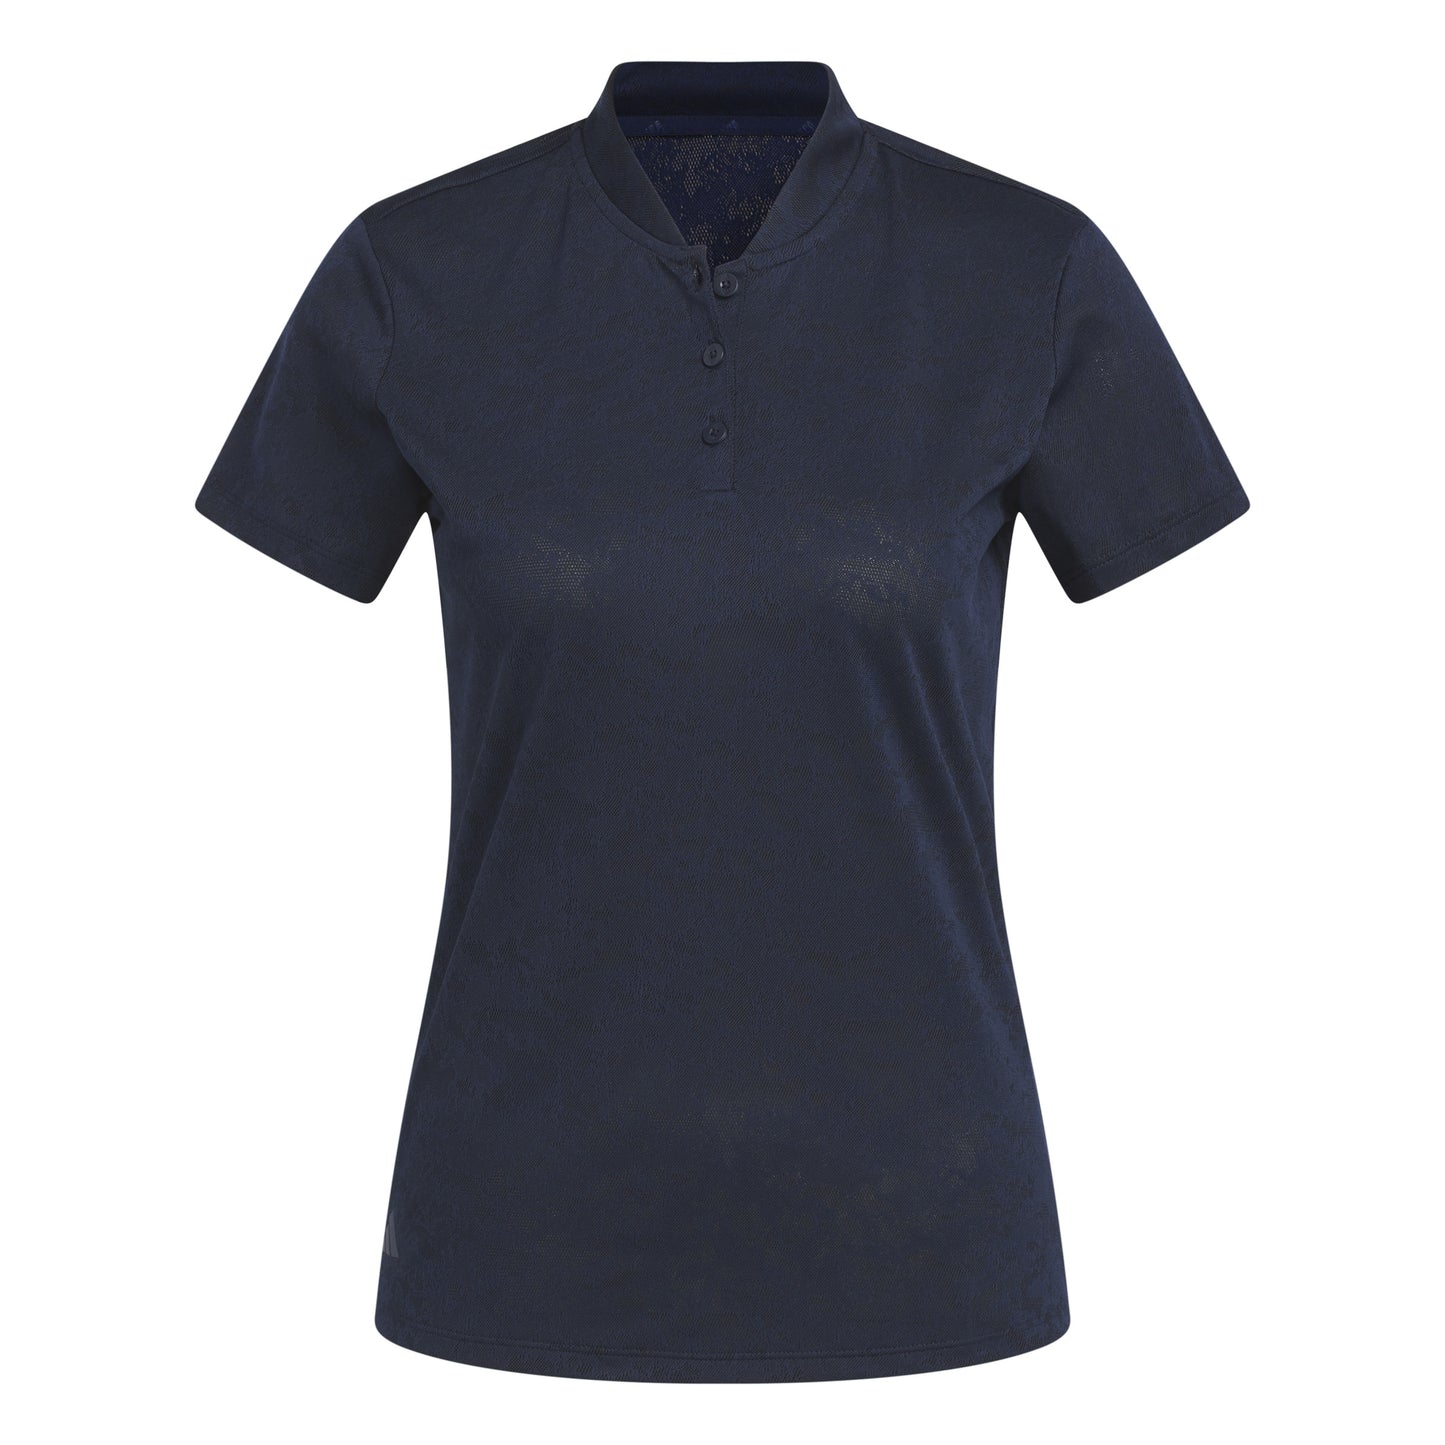 adidas Ladies Short Sleeve Golf Polo with Jacquard Lace Print 